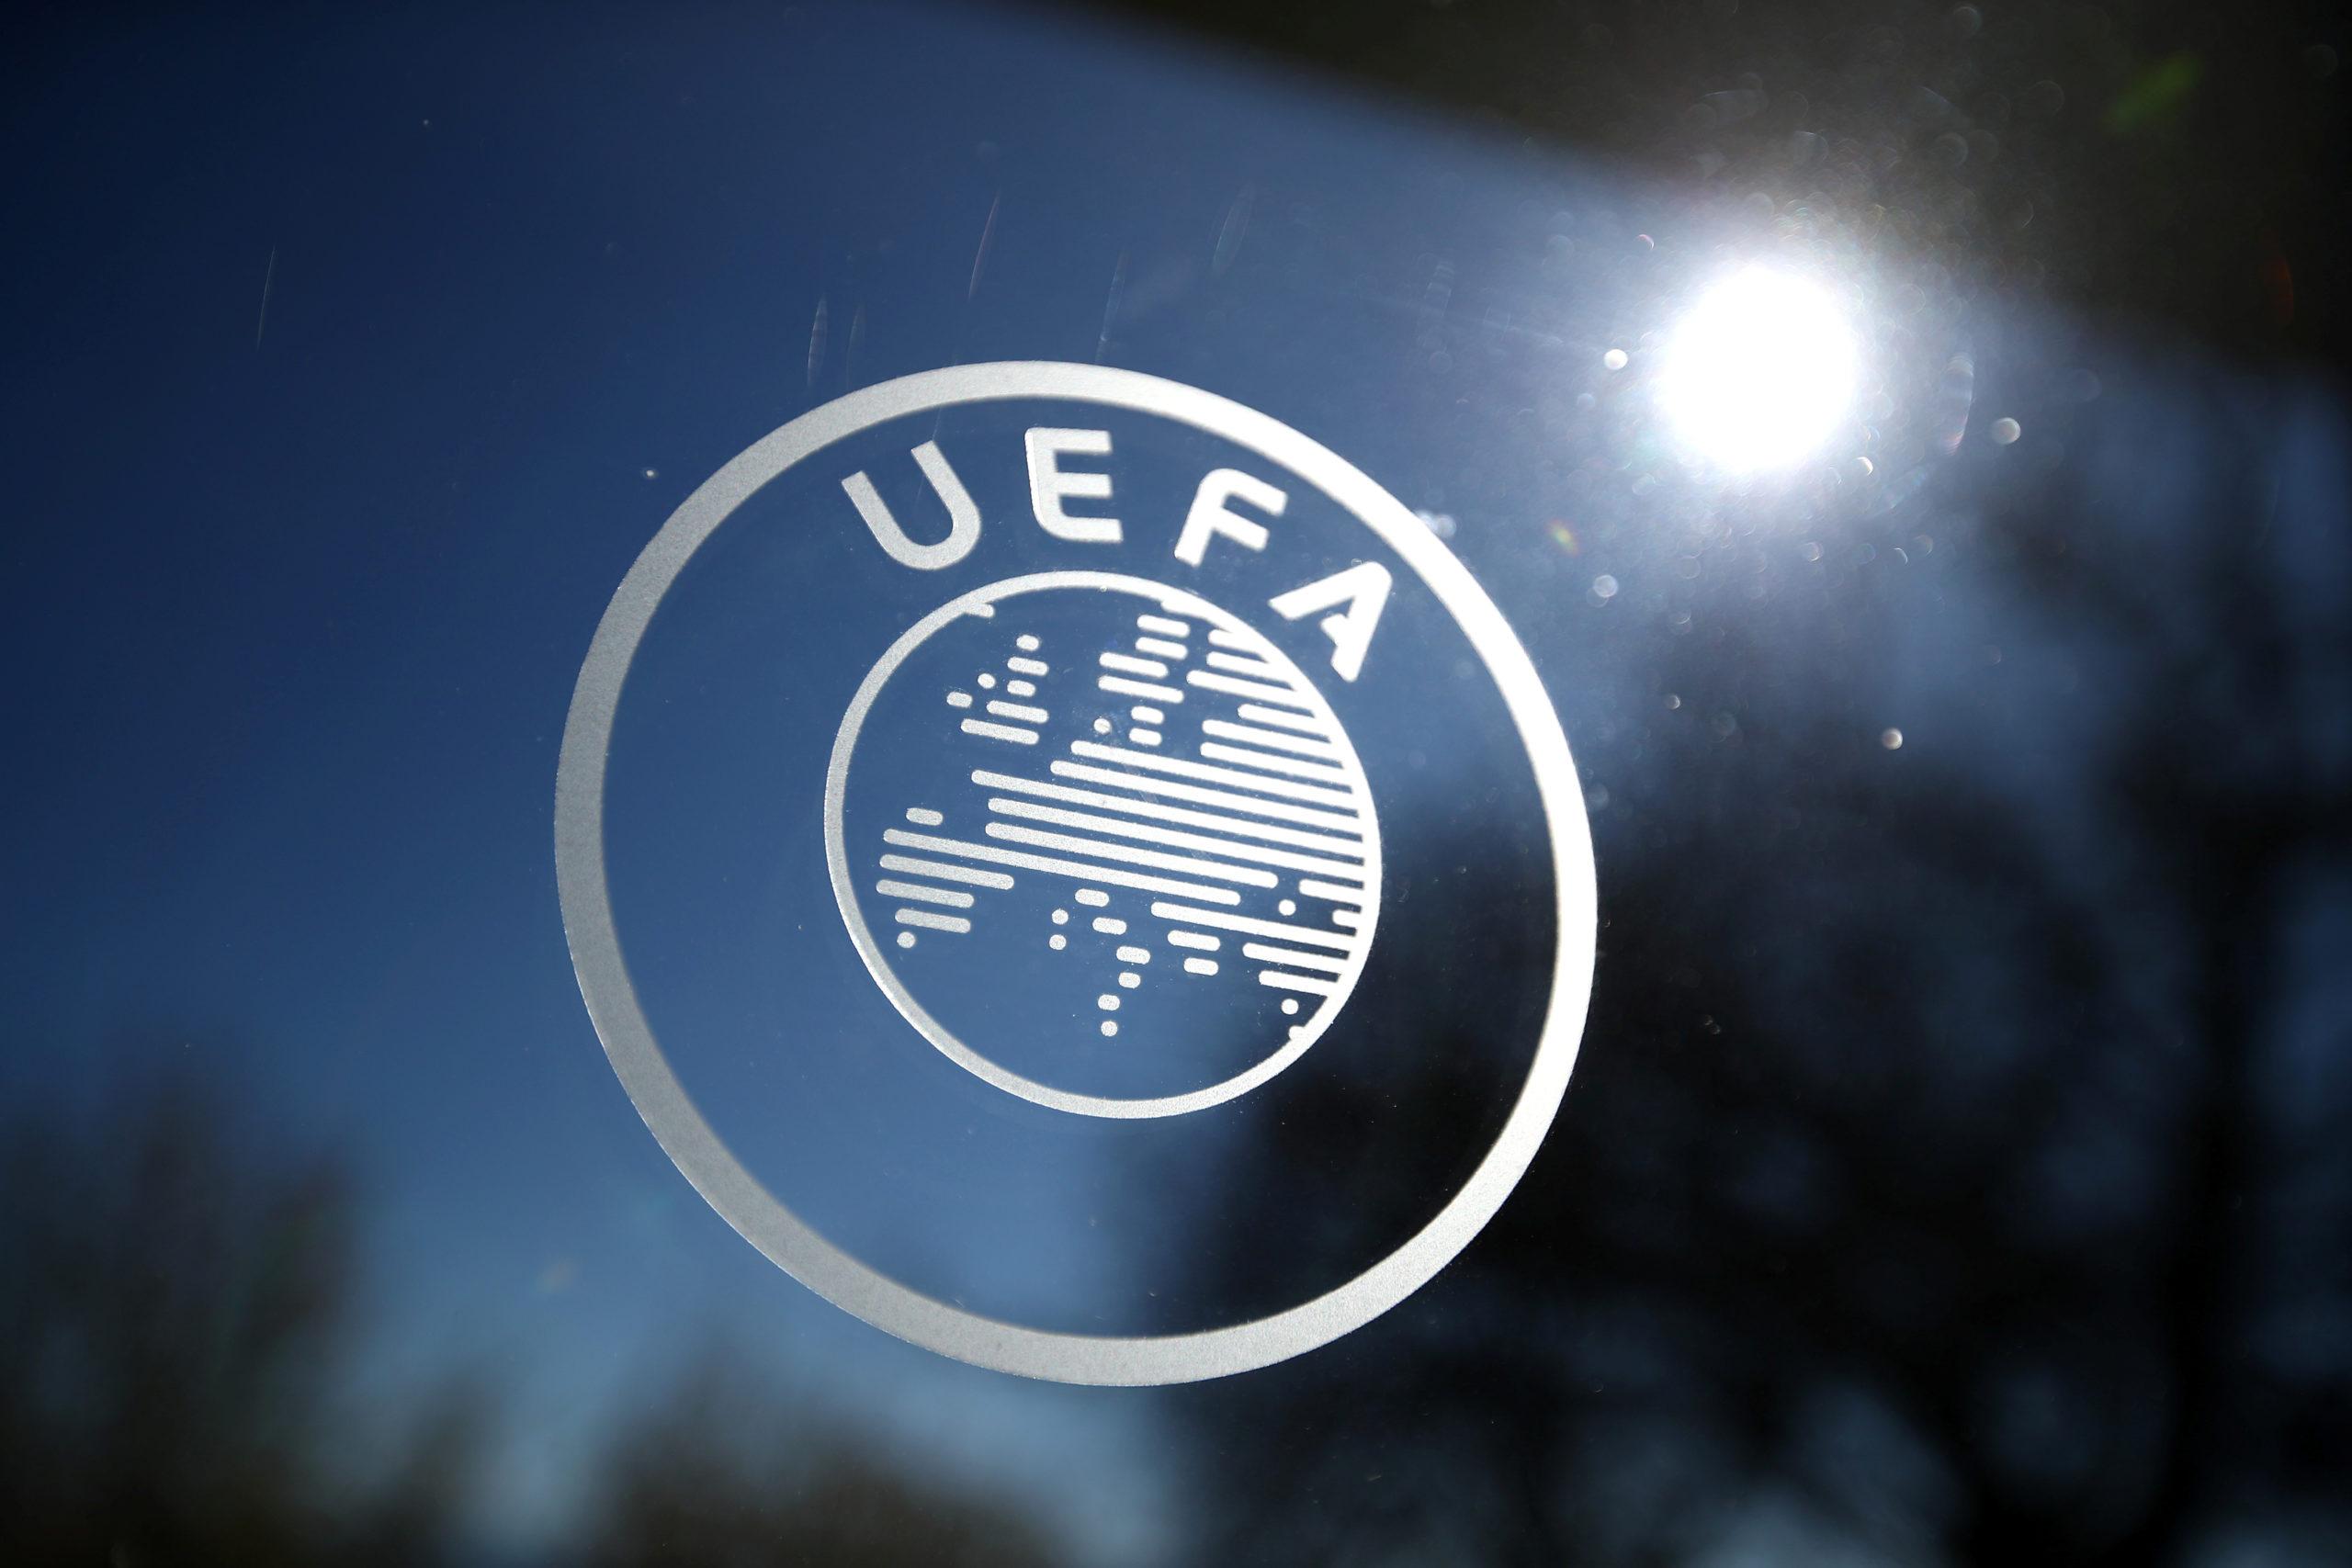 UEFA wants fans at every Euro match